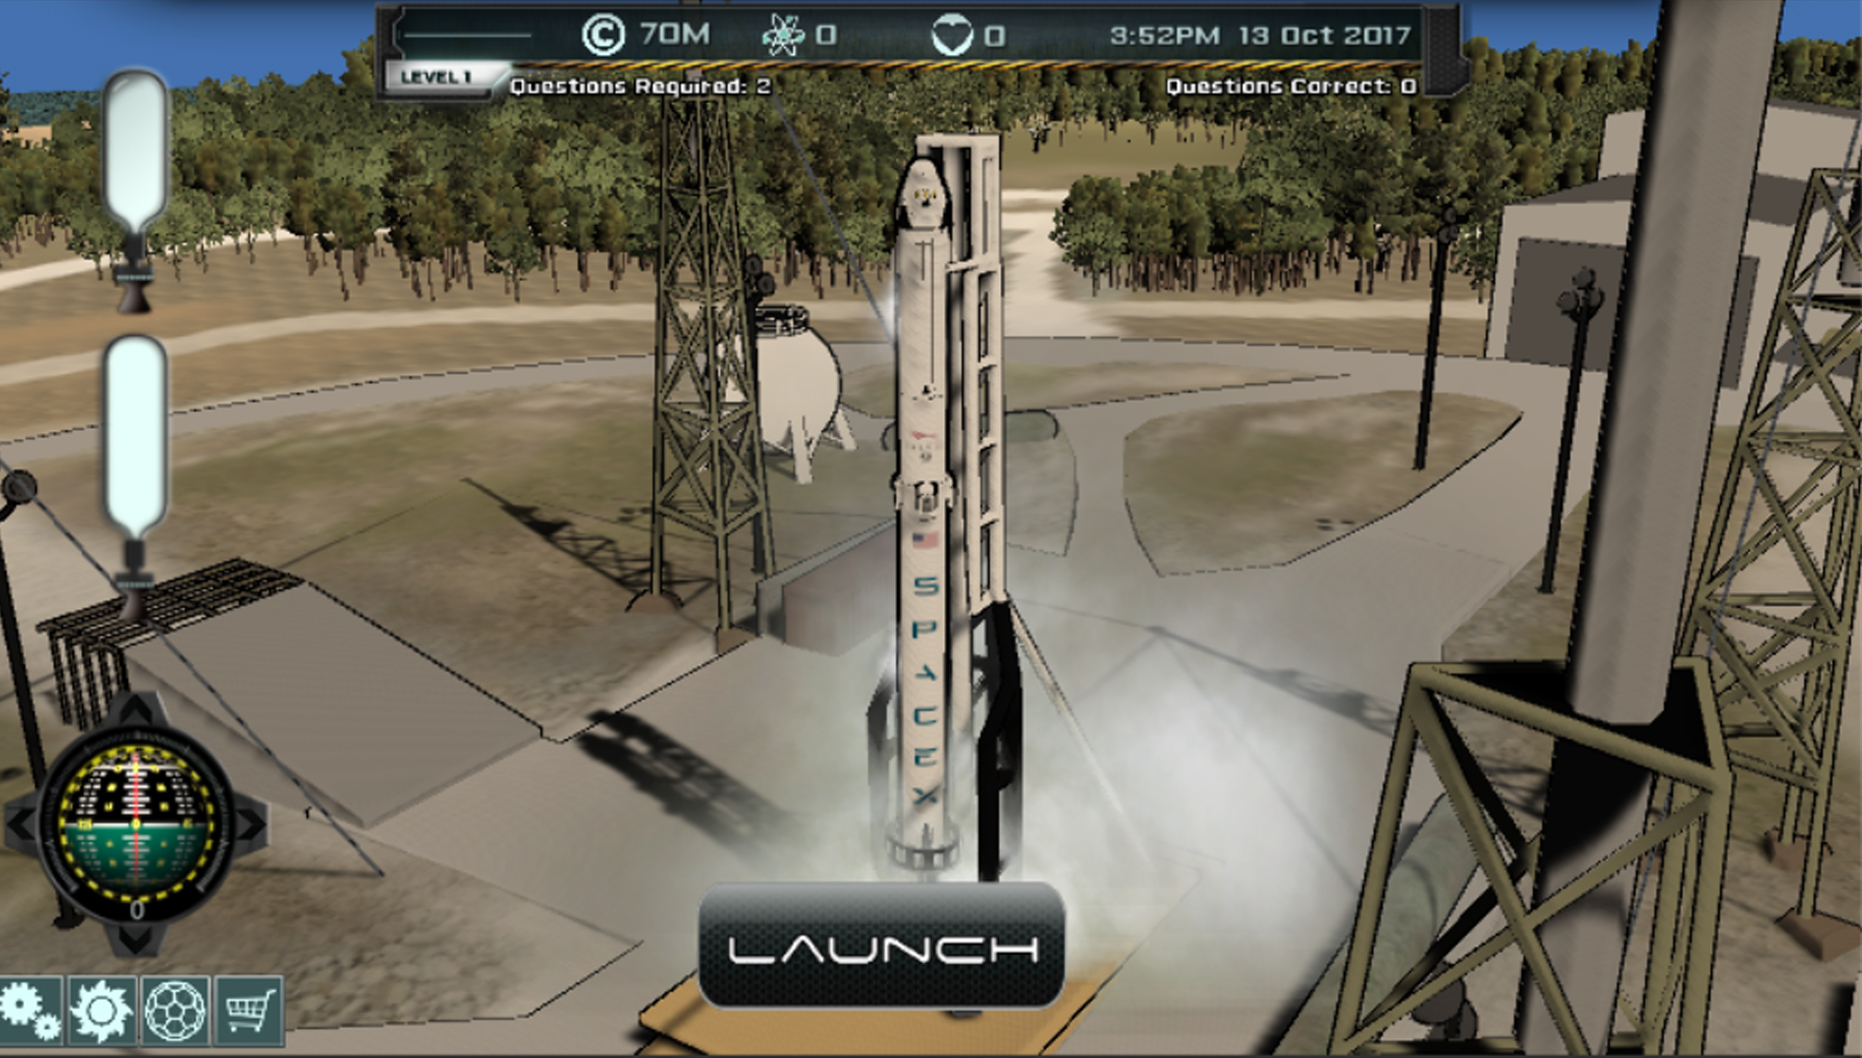 Intergalactic Education SpaceX Falcon9 launch e learning gameplay aligned to Common Core standards